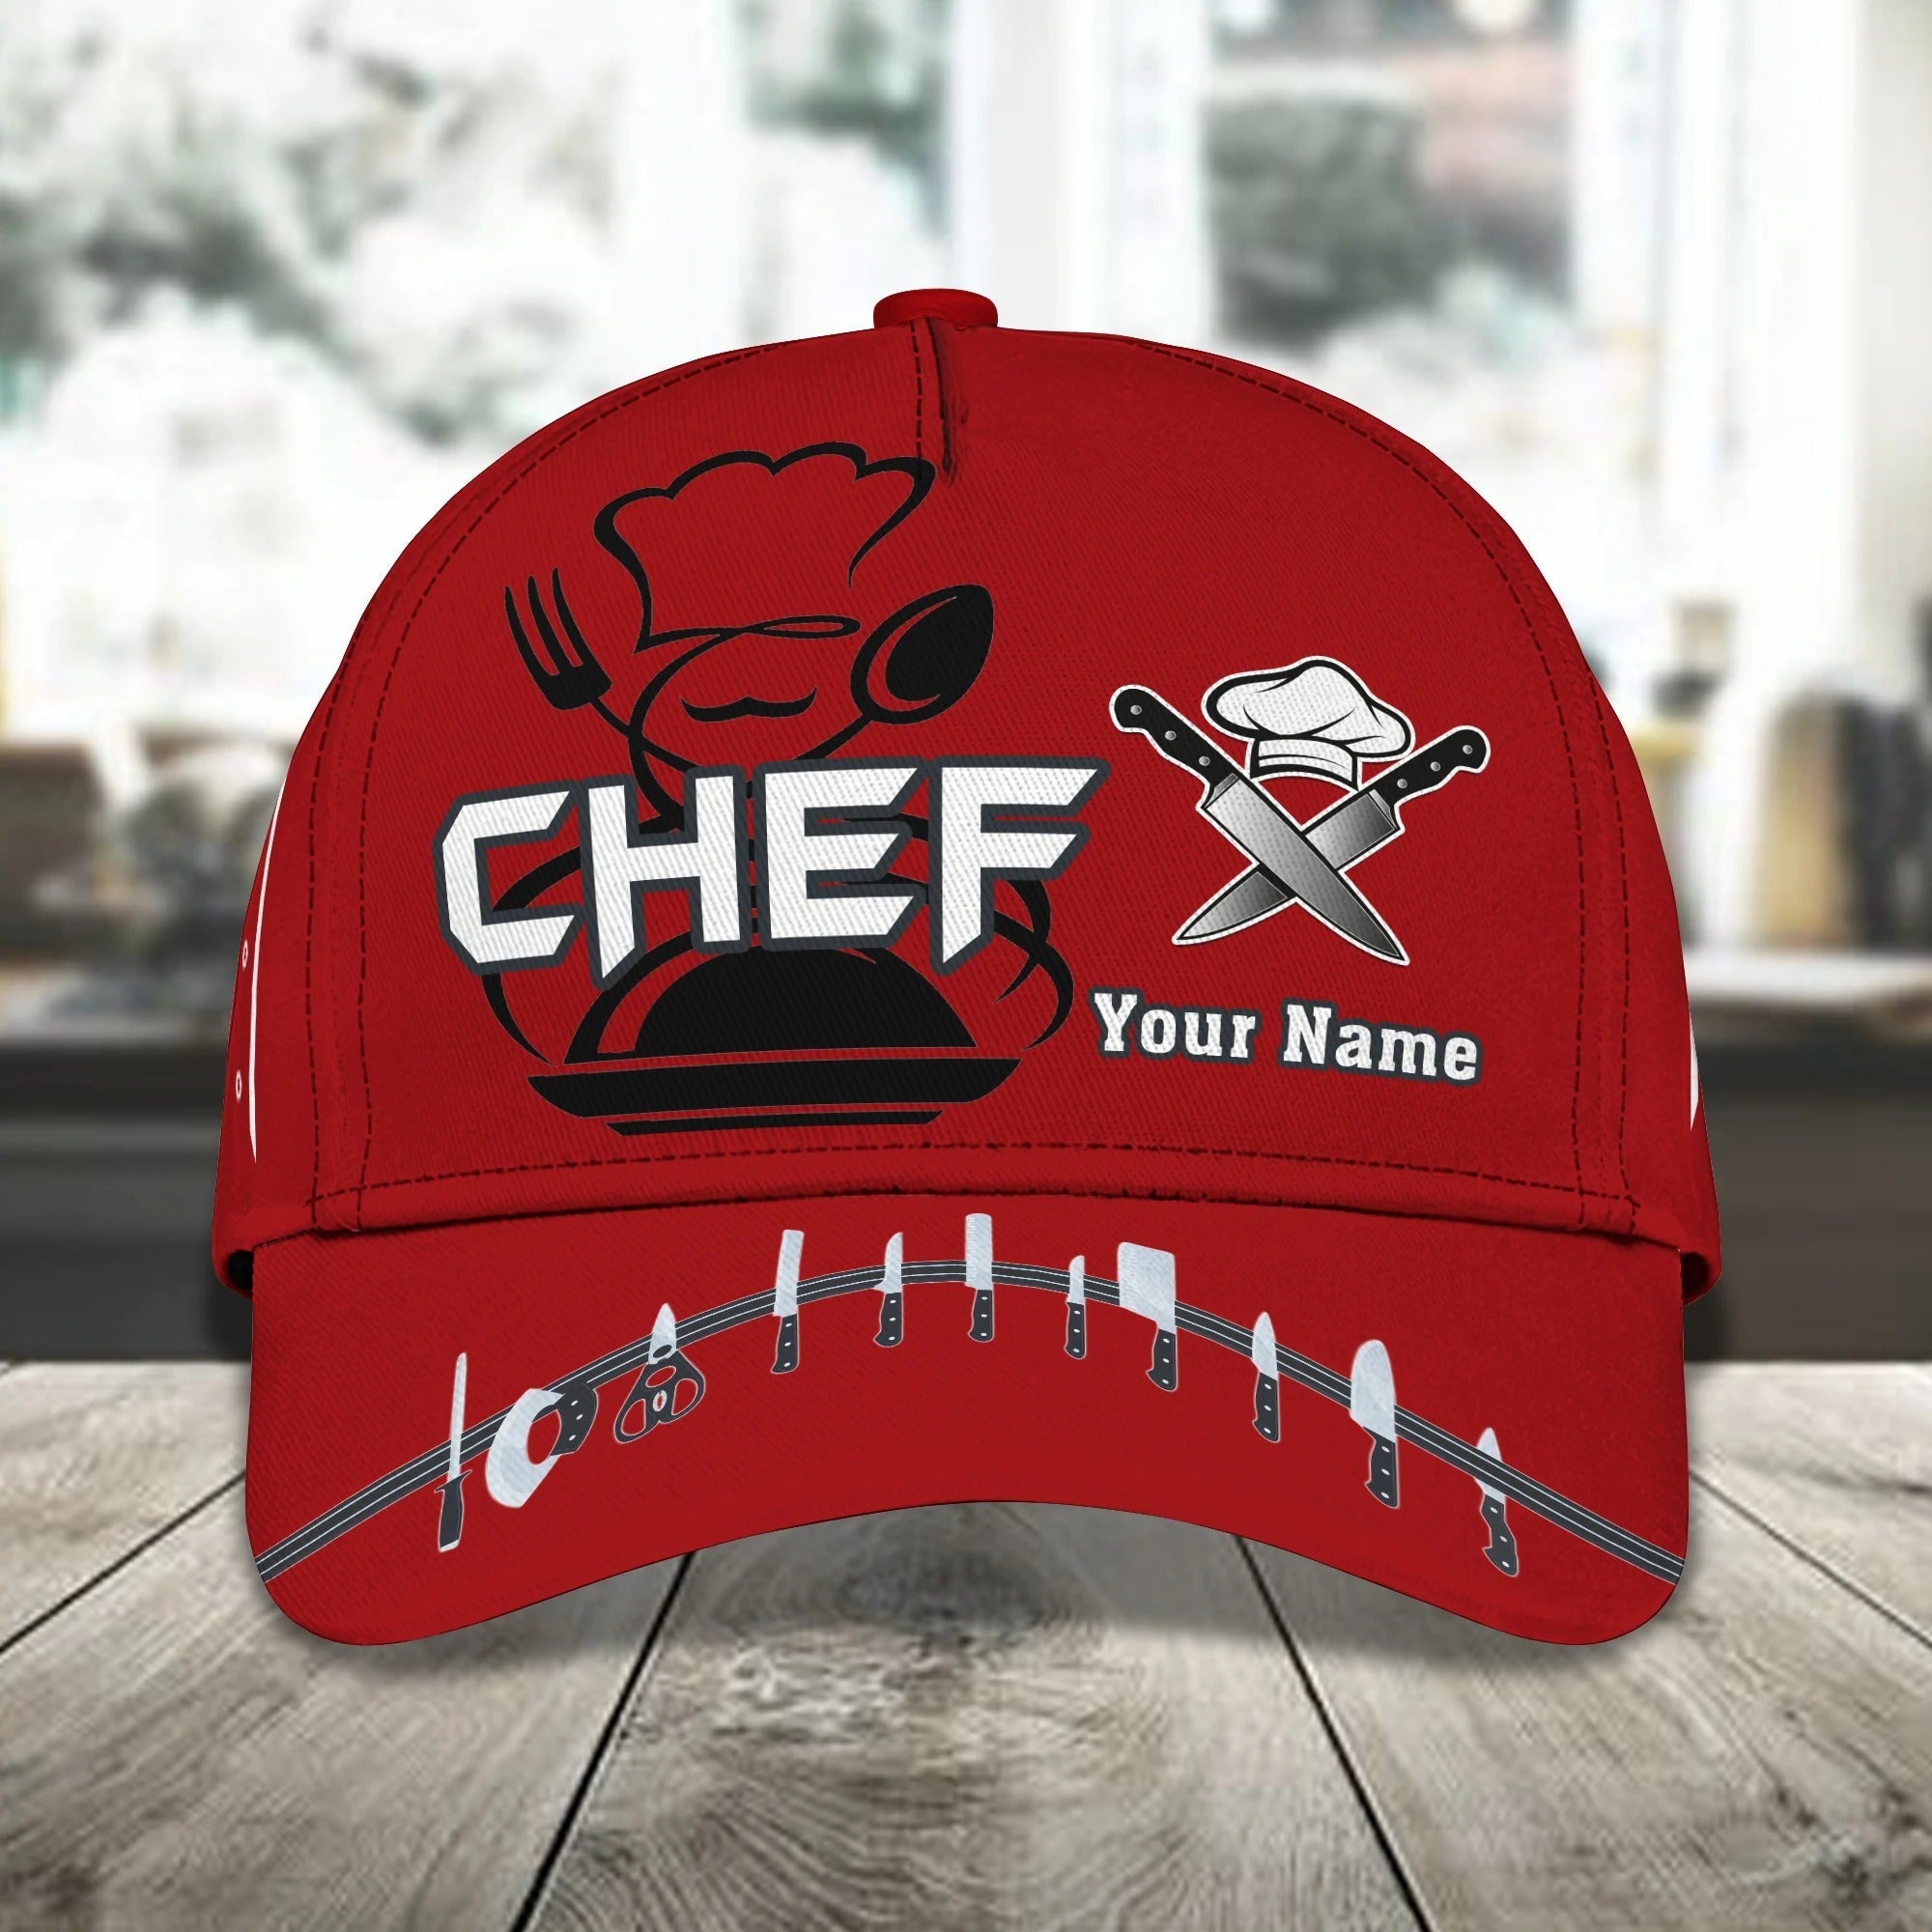 Personalized 3D Full Print Baseball Cap For Chef/ Master Chef Classic Cap Hat/ Gift For Master Chef